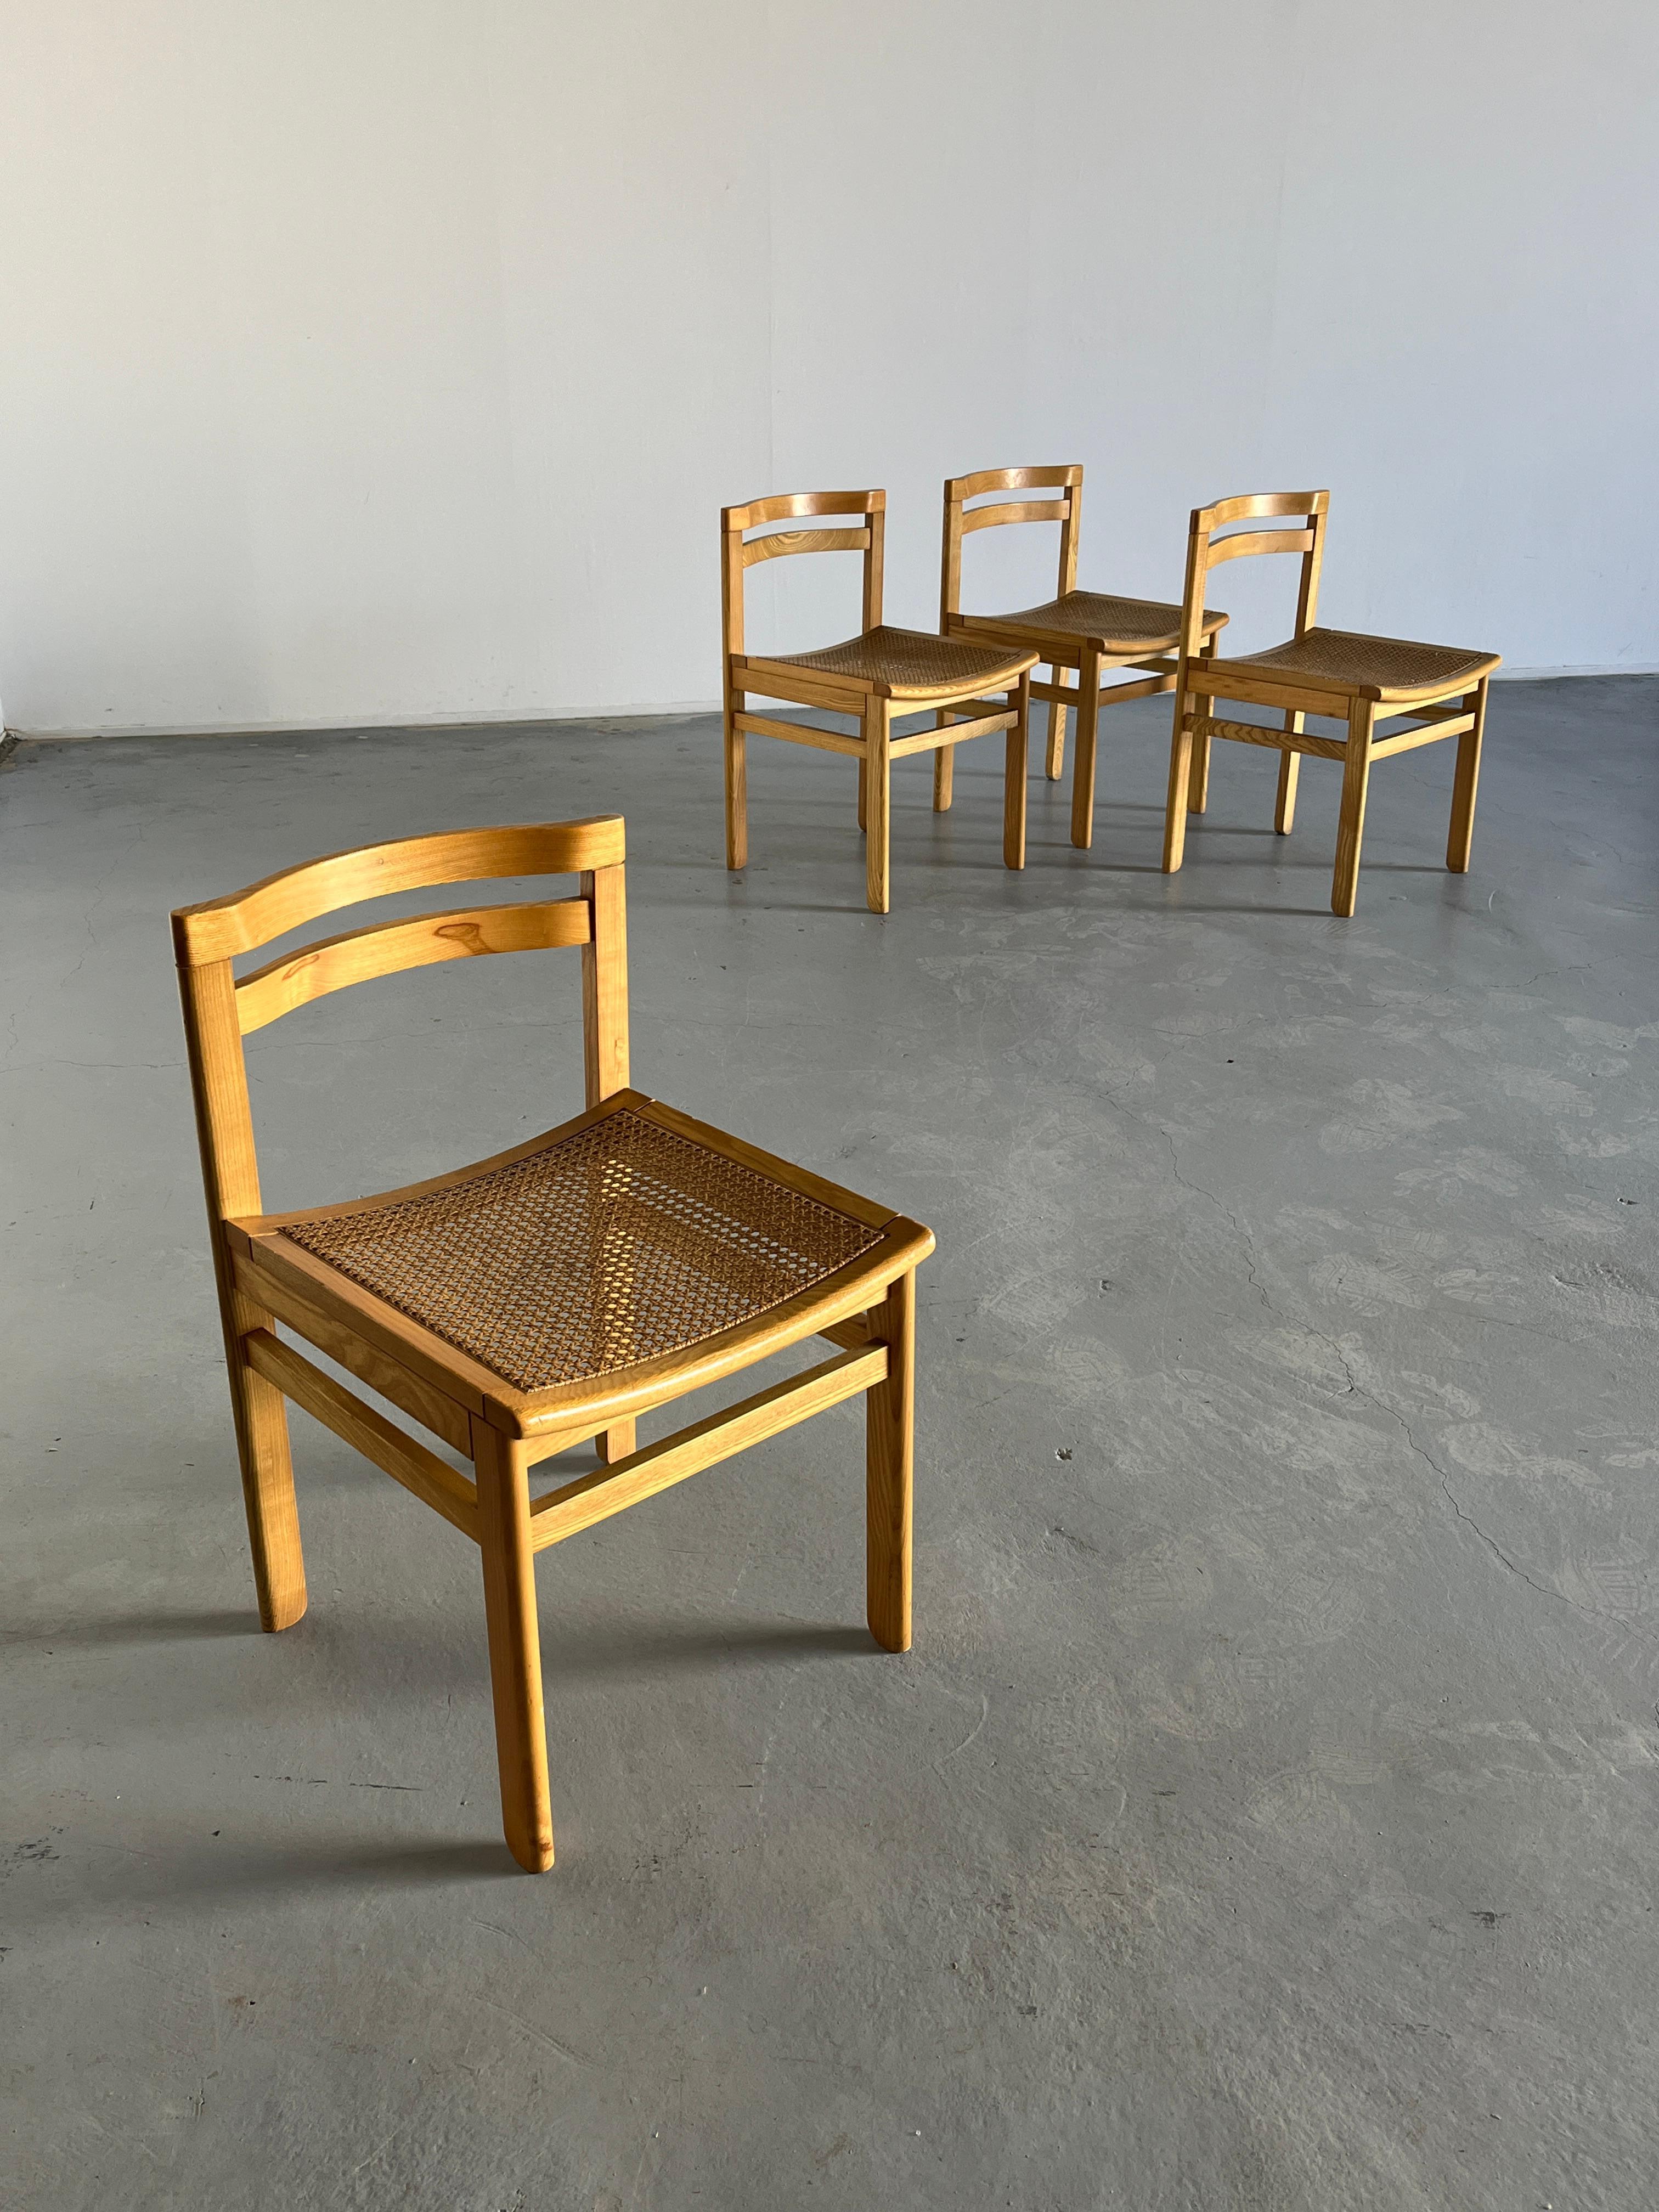 Set of 4 Mid-Century Modern Constructivist Wooden Dining Chairs in Beech, 1960s In Good Condition For Sale In Zagreb, HR